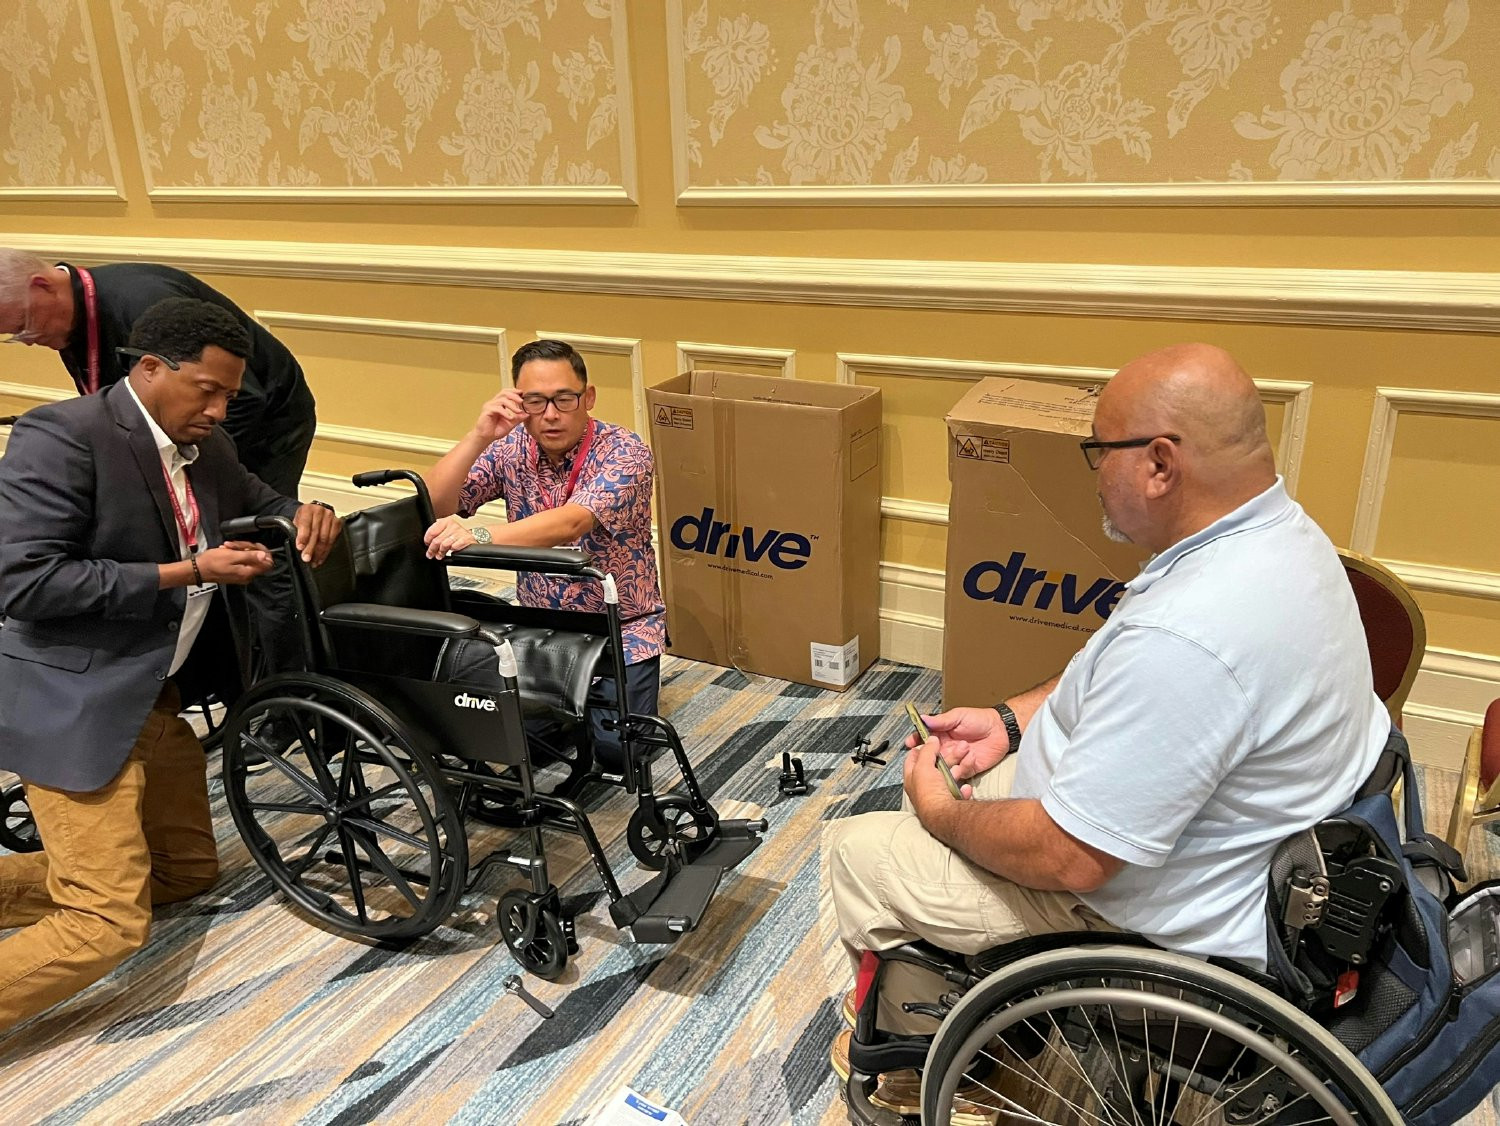 Esperion team members, supervised by PVA, built 40 wheelchairs for Veterans & civilians in need of medical equipment.